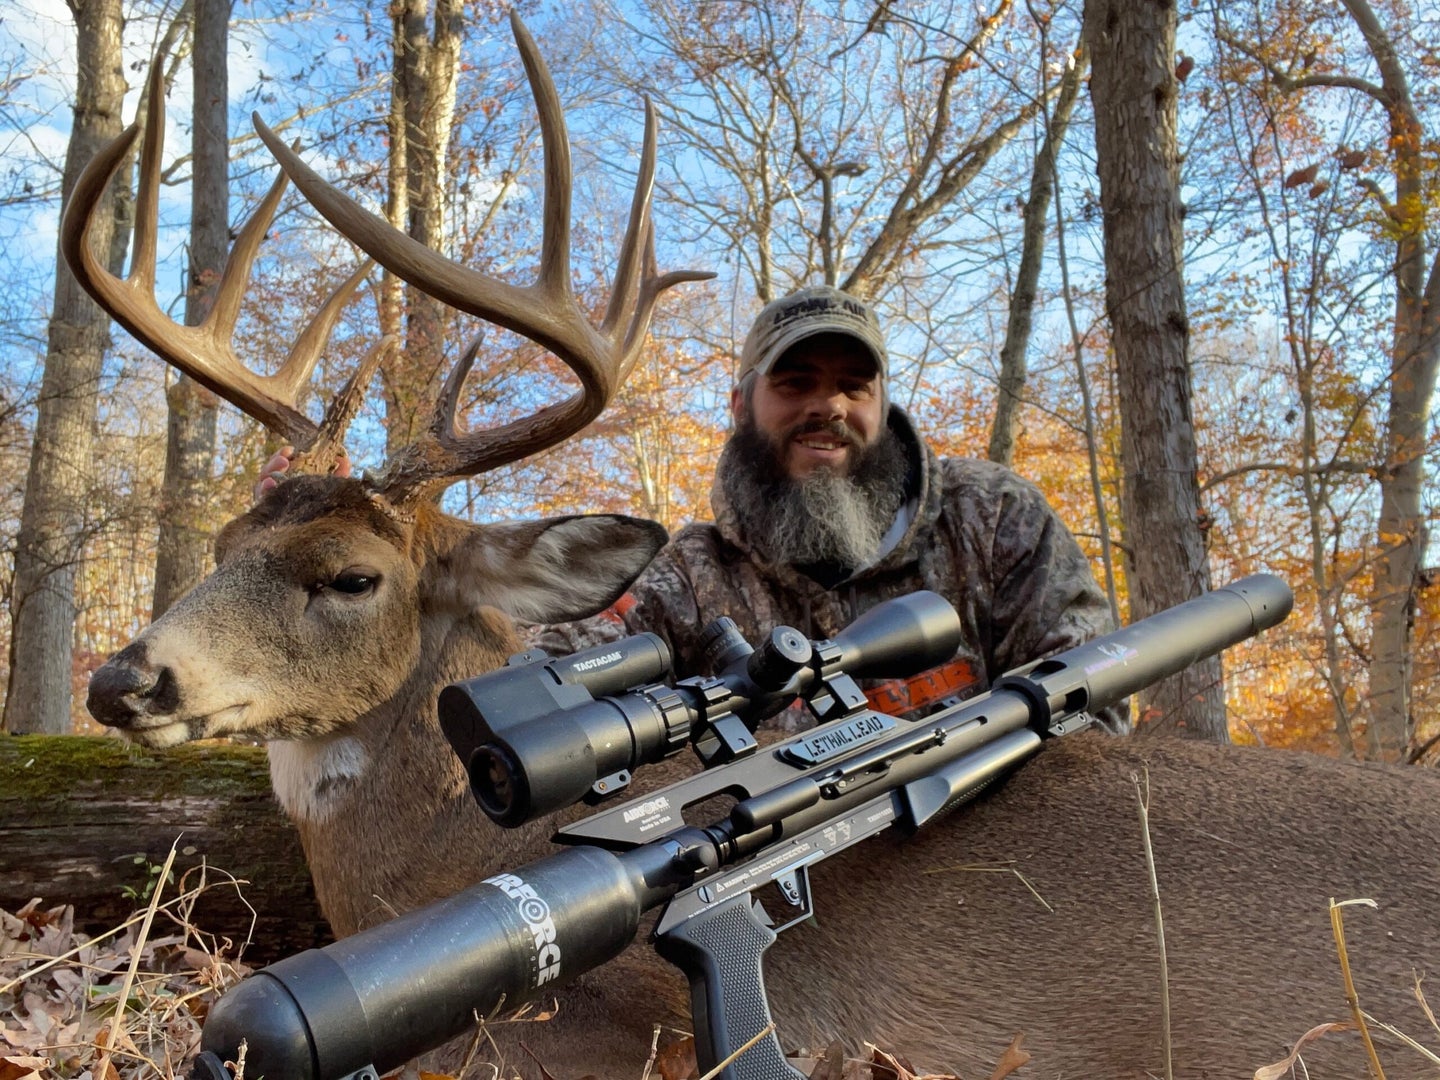 Chad Simon holds up a whitetail buck taken with a pre-charged pneumatic air rifle.